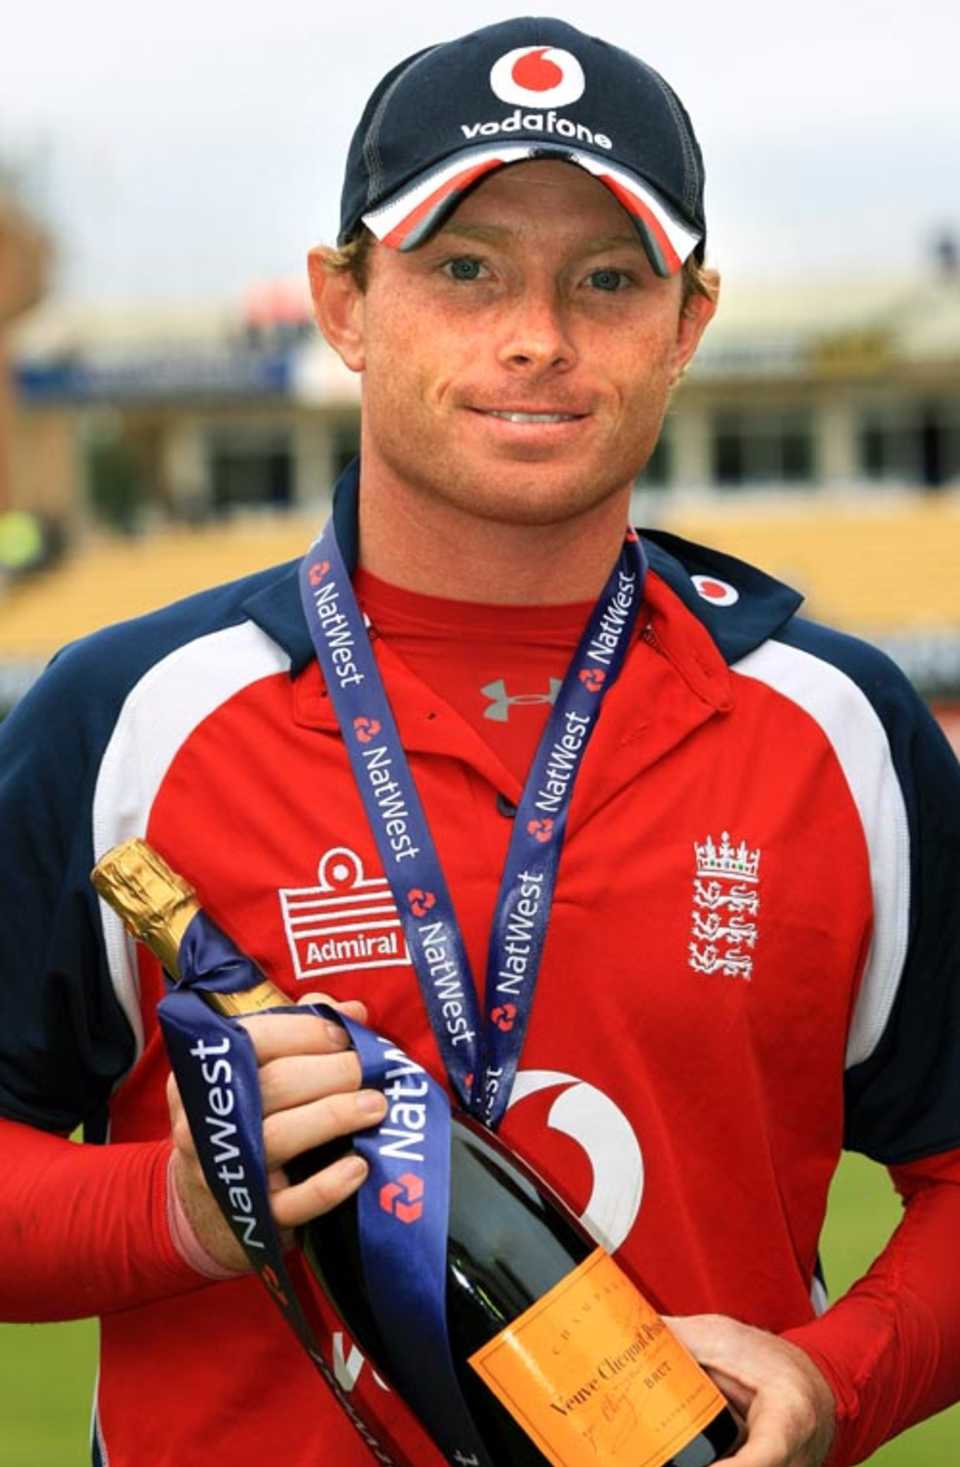 Ian Bell with his Man-of-the-Match medal and champagne